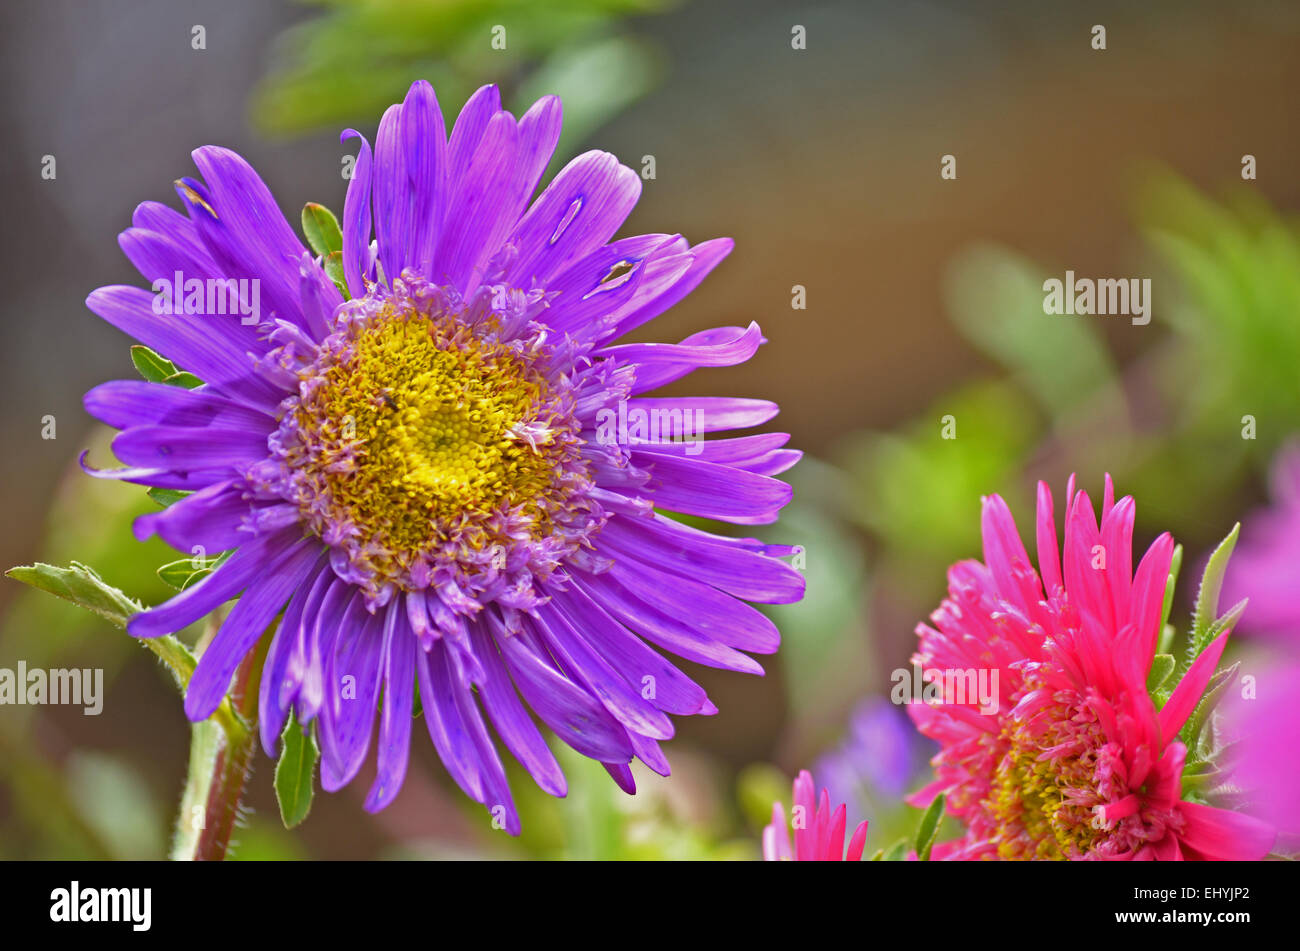 Aster flower with purple petals at Botanical Garden in Ooty,Tamilnadu,India Stock Photo